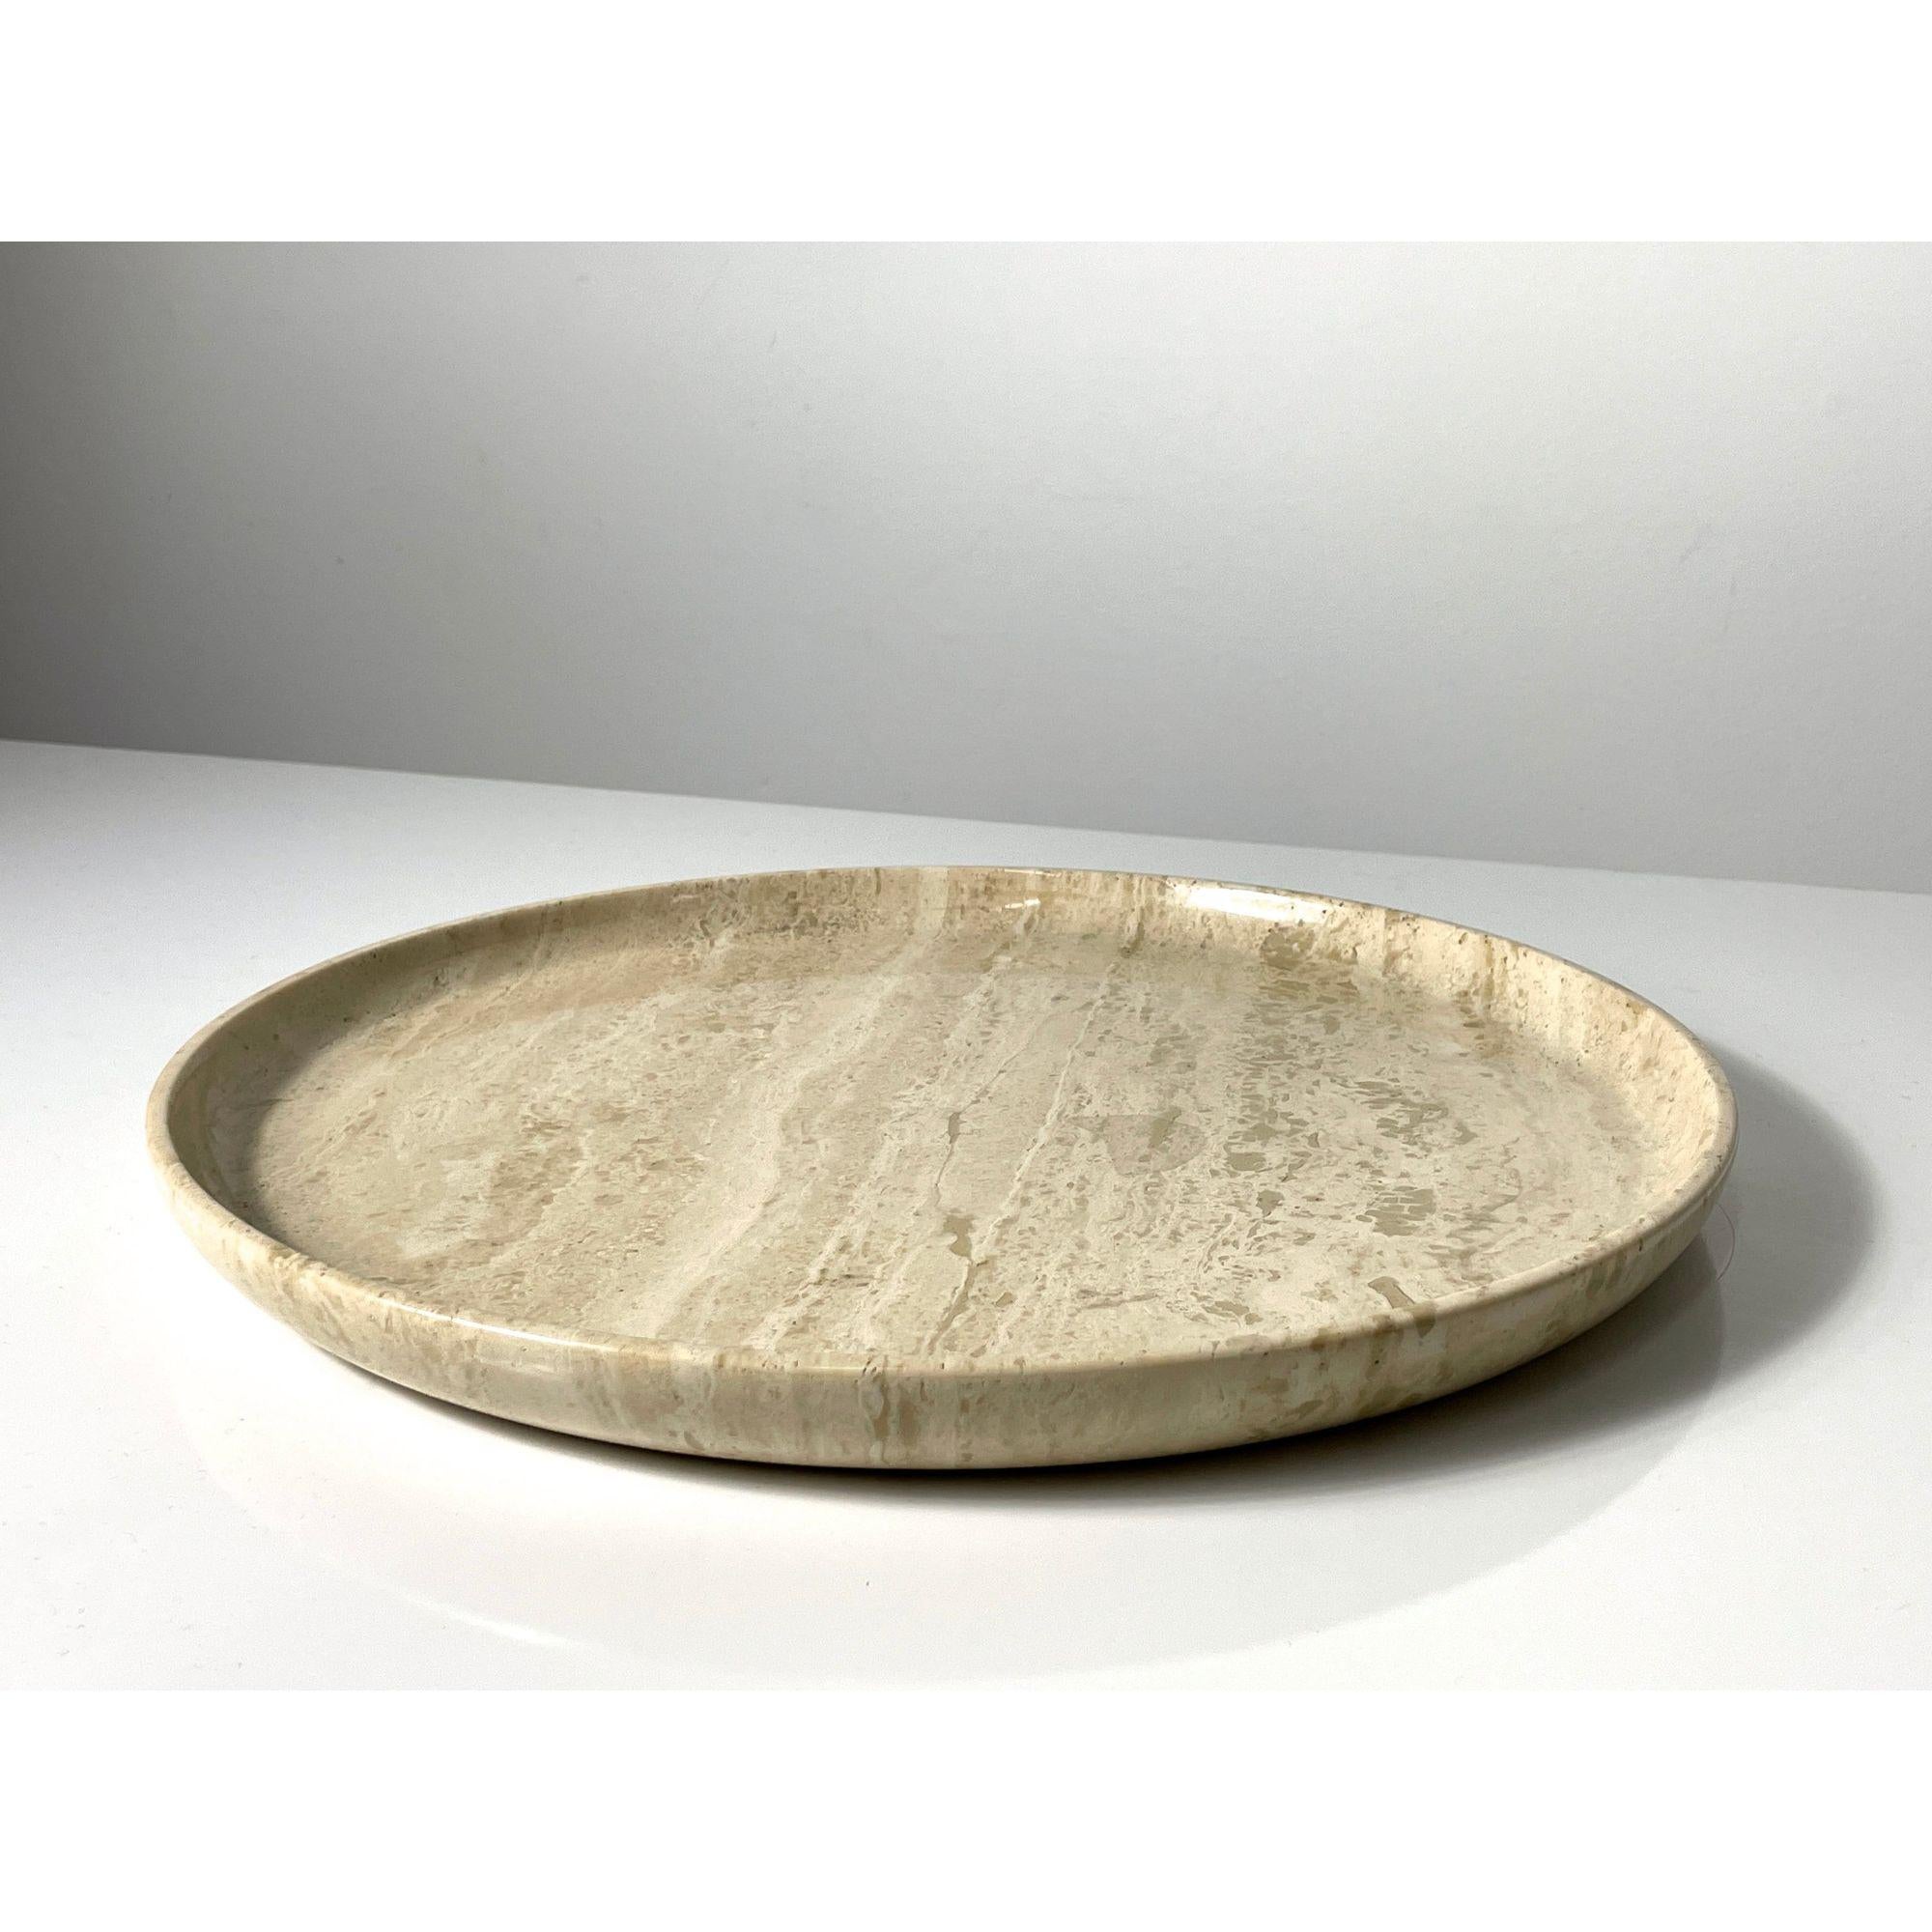 A polished travertine decorative tray / bowl attributed to Giusti and Di Rosa circa 1970s
Shallow form with lipped edge and green felted underside

Additional Information:
Materials: Travertine
Dimensions: 13.625